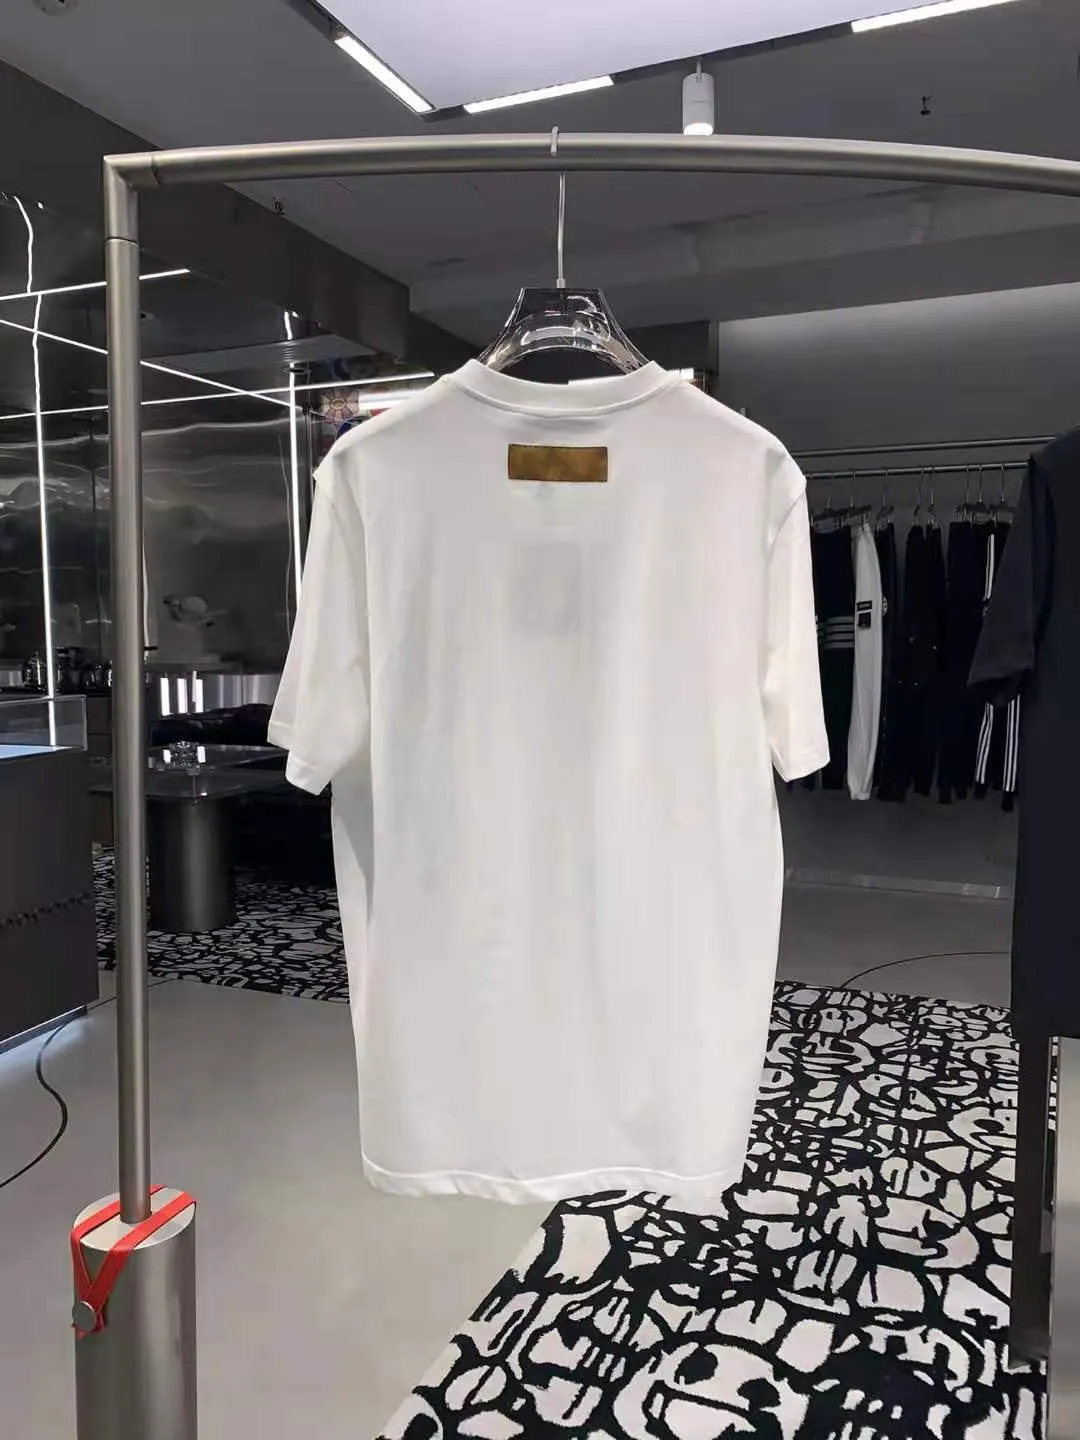 21SS early spring Embroidered playing card short sleeve Short sleeve Tee Men Women High Street Fashion Short Sleeves T-Shirts zdll0106.